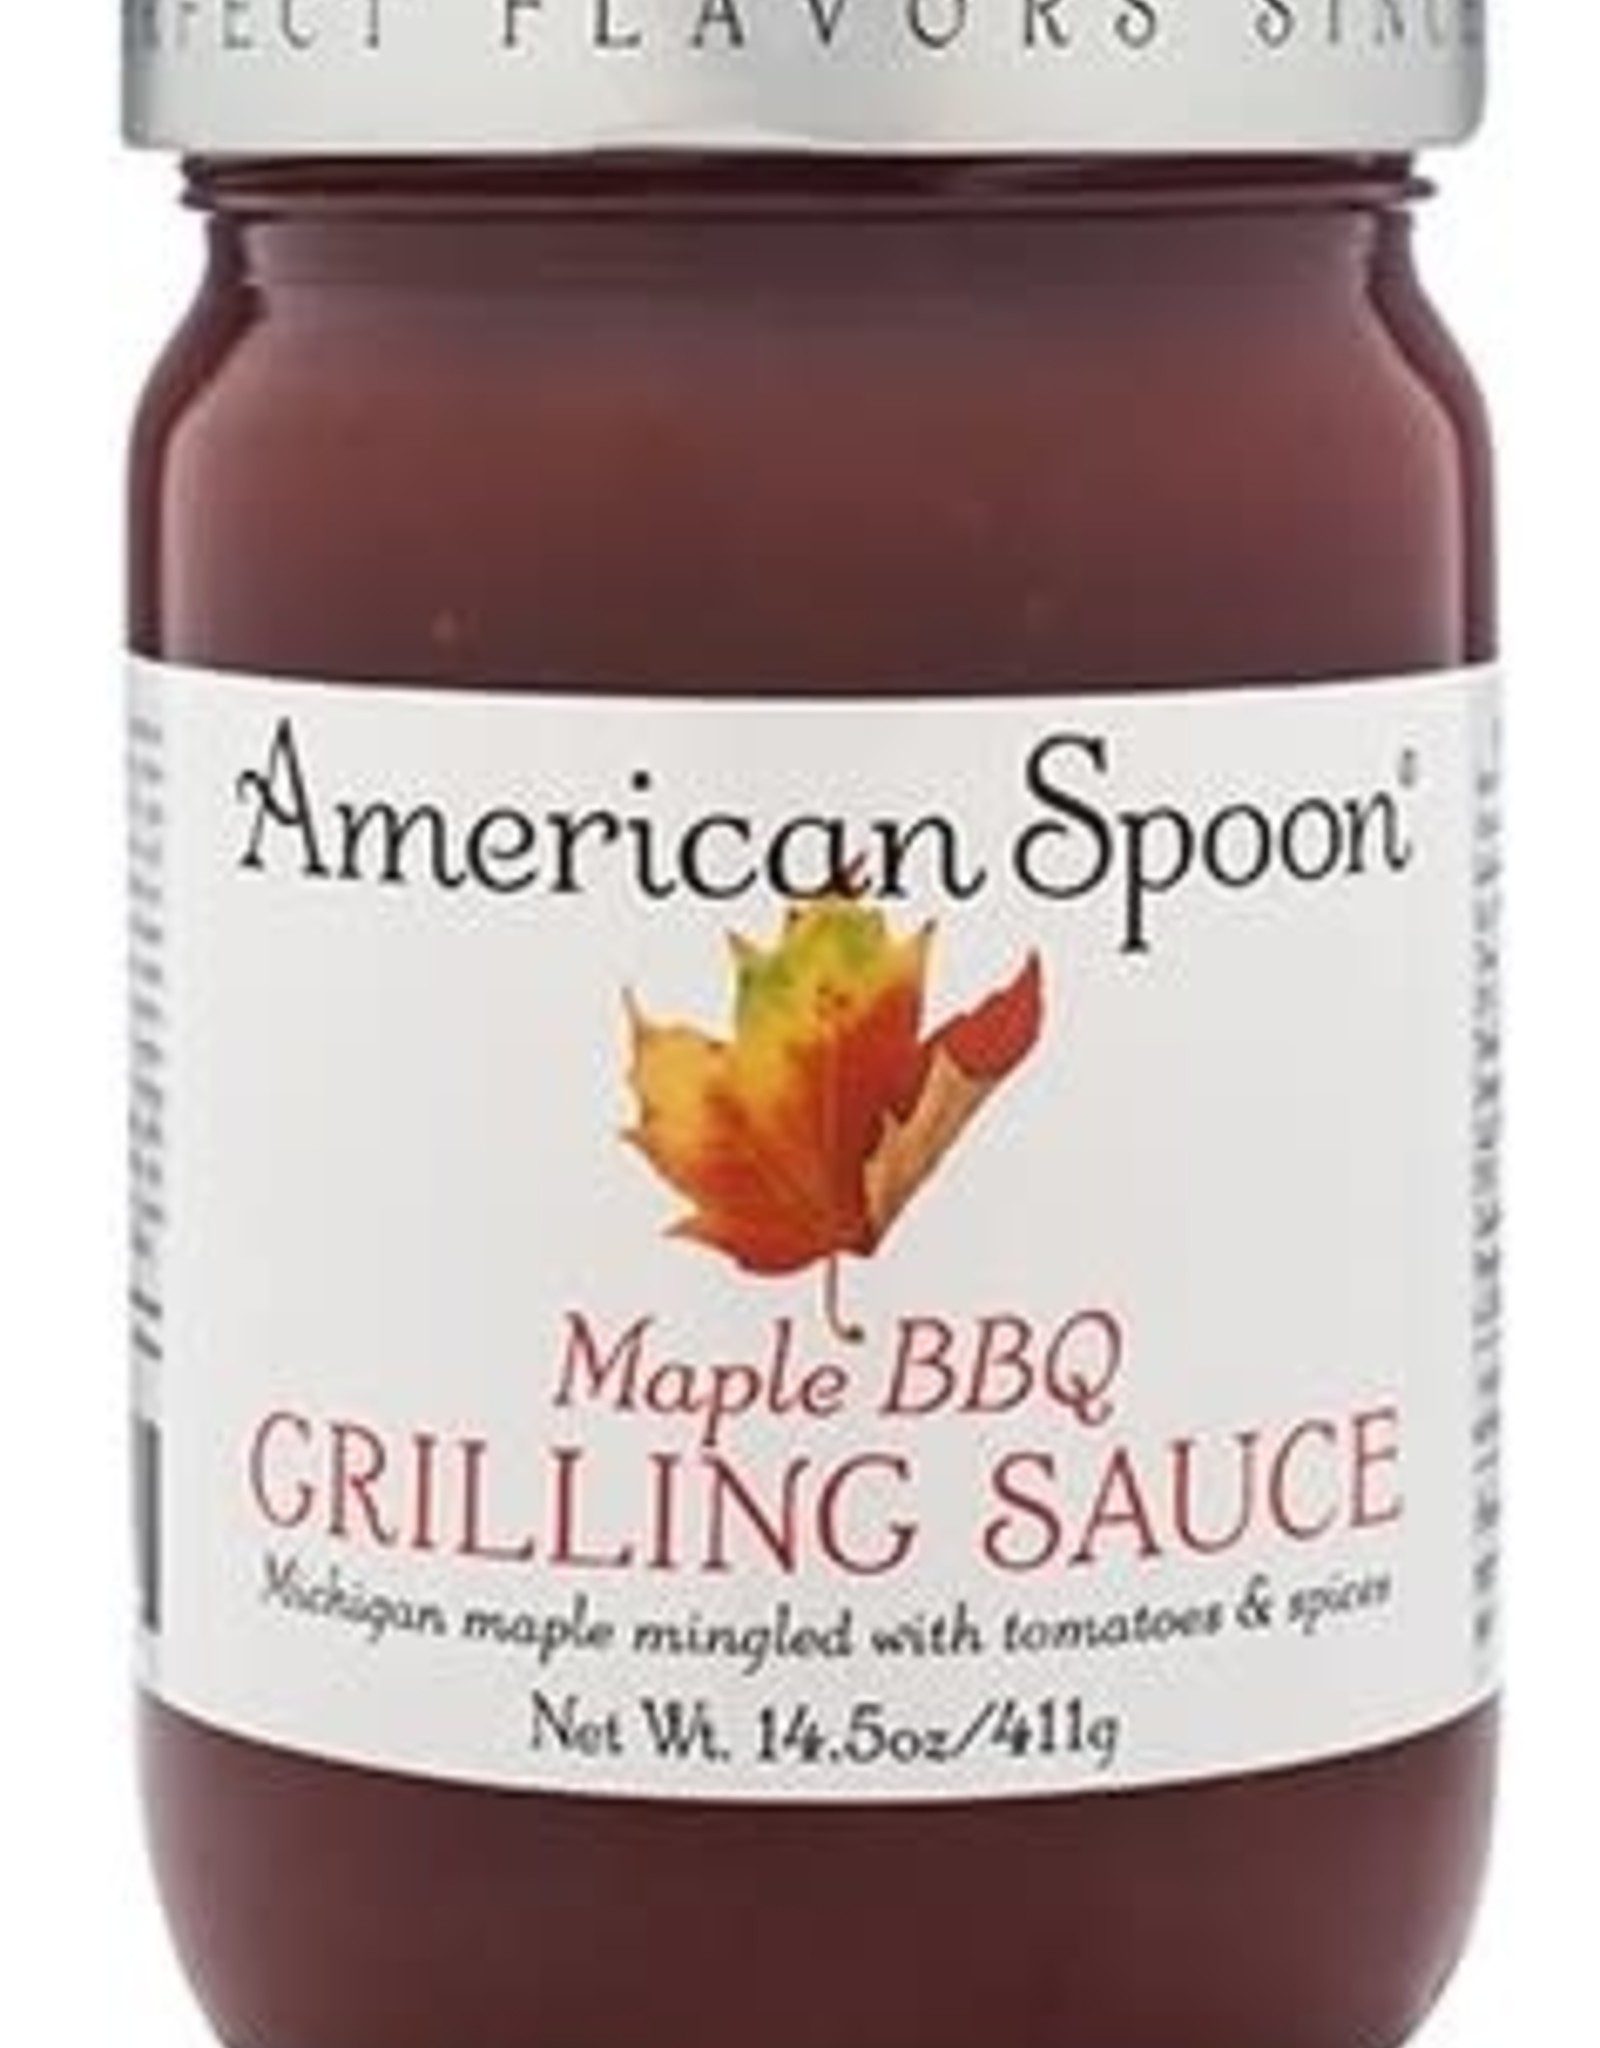 AMERICAN SPOON MAPLE BBQ GRILLING SAUCE - The Wild Olive